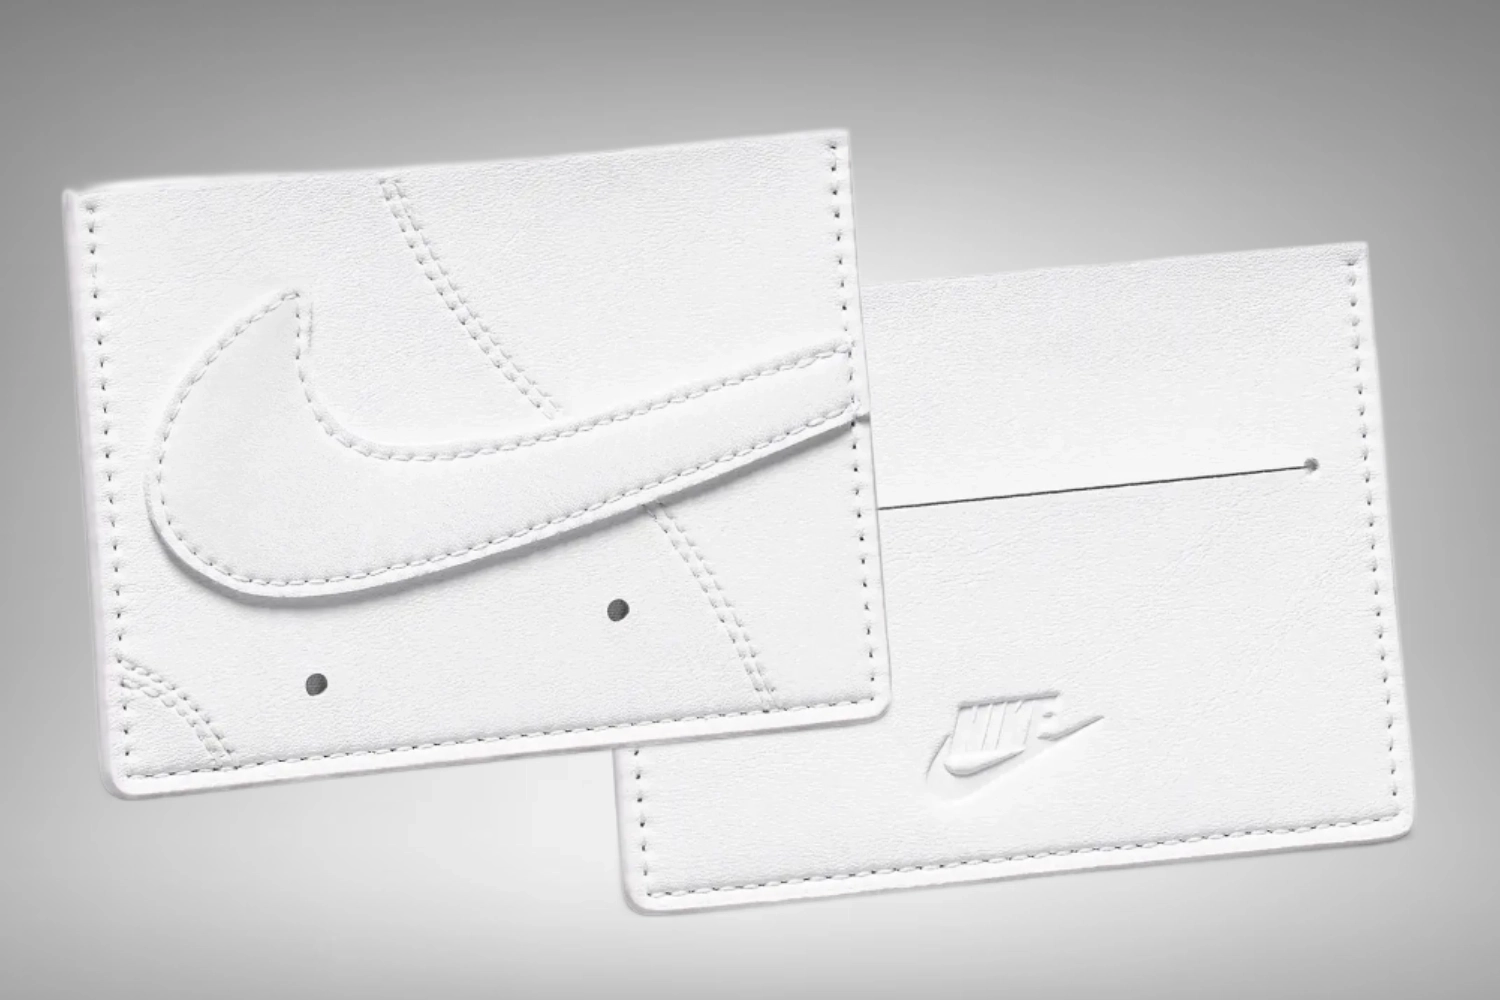 Nike Wallets take inspiration from iconic sneaker models